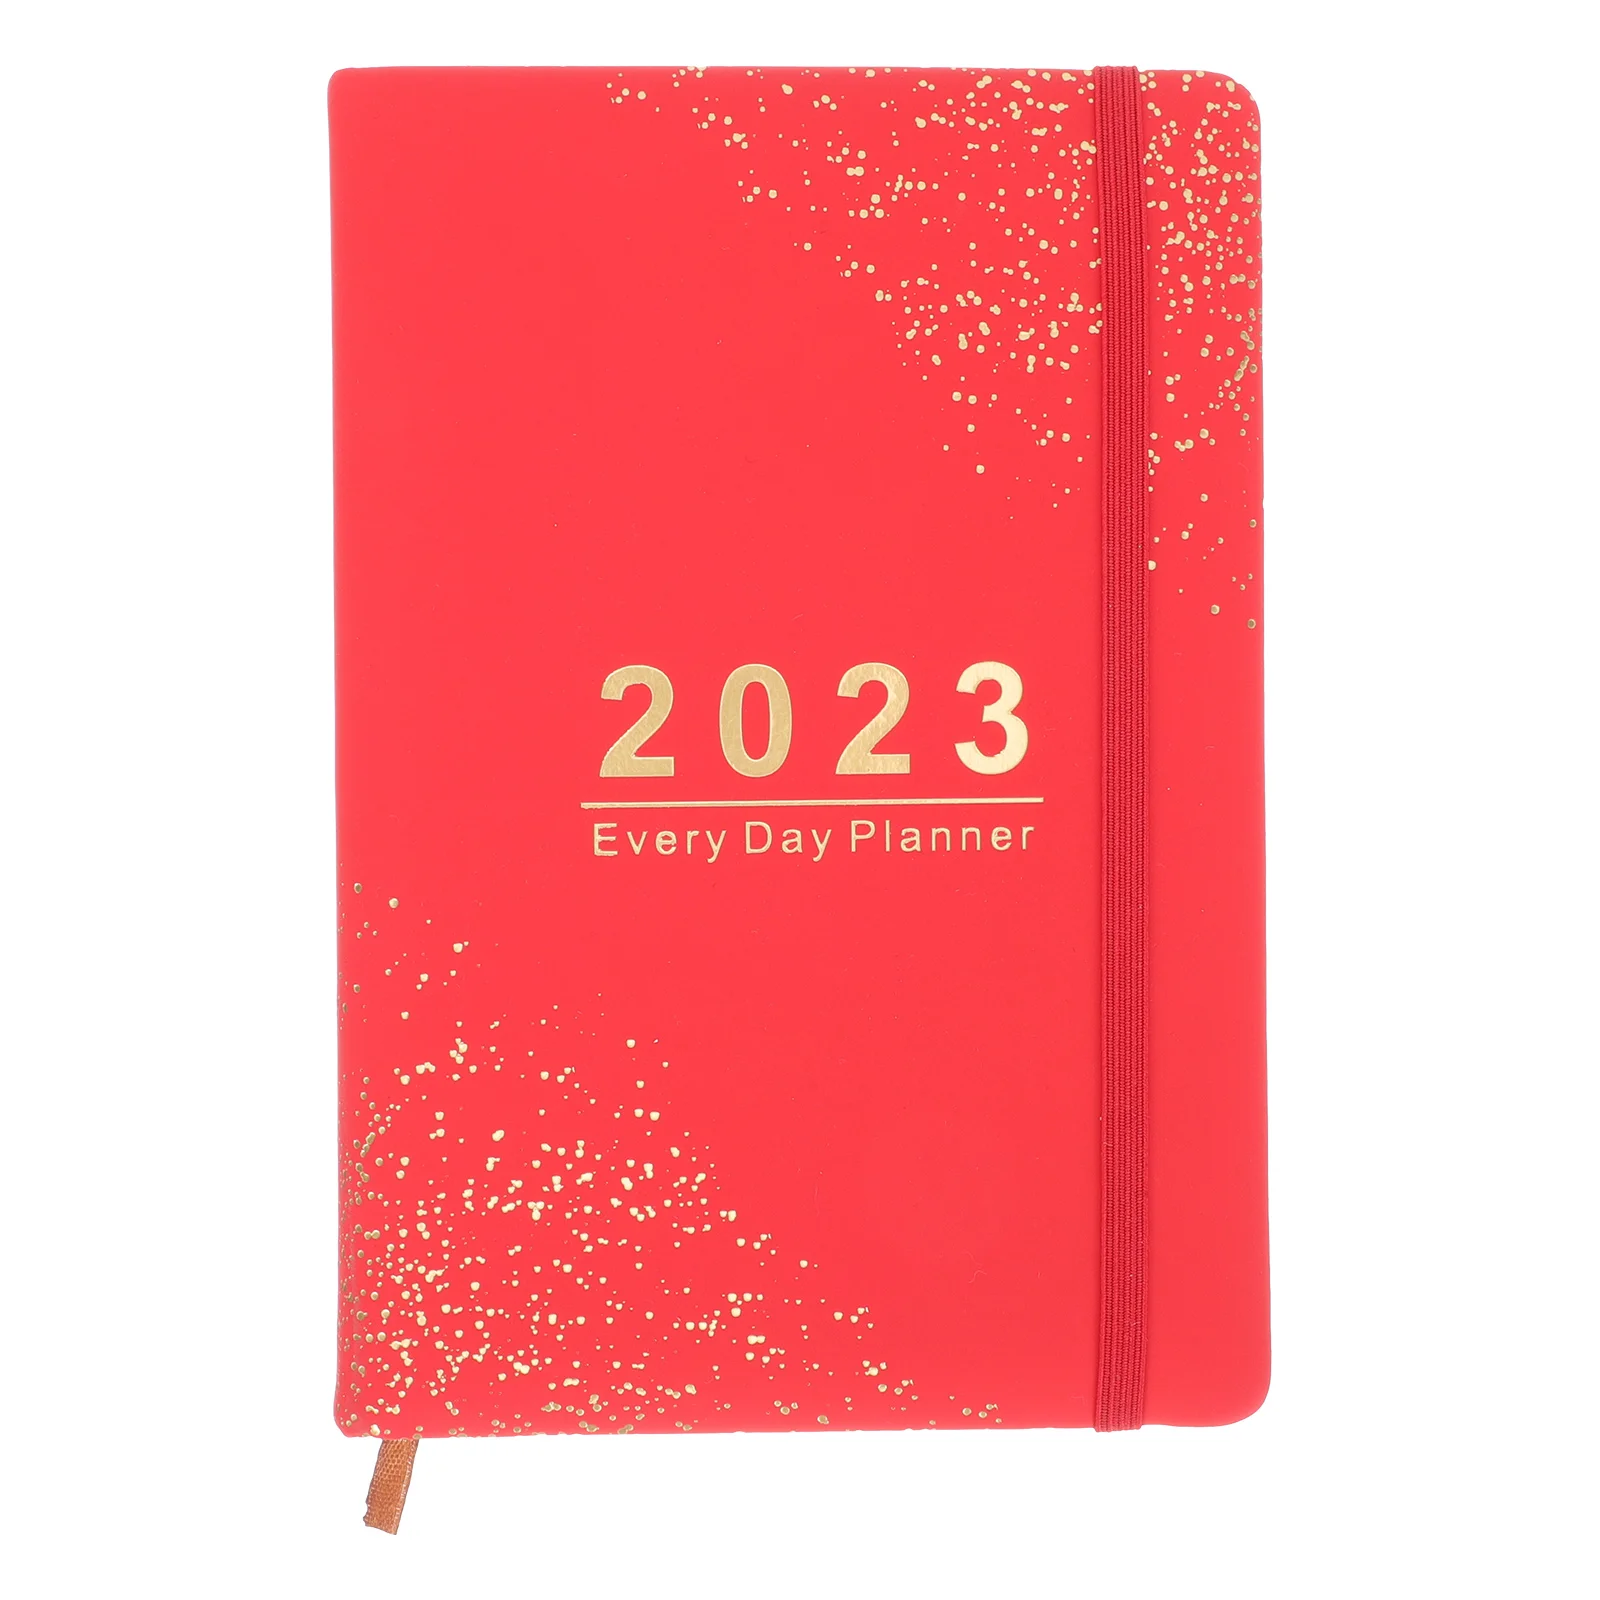 

Planner Book Notebook 2023 Appointment Daily June Diarydo List Page Per Day Calendar Portable Agenda Planners Planning Notebooks